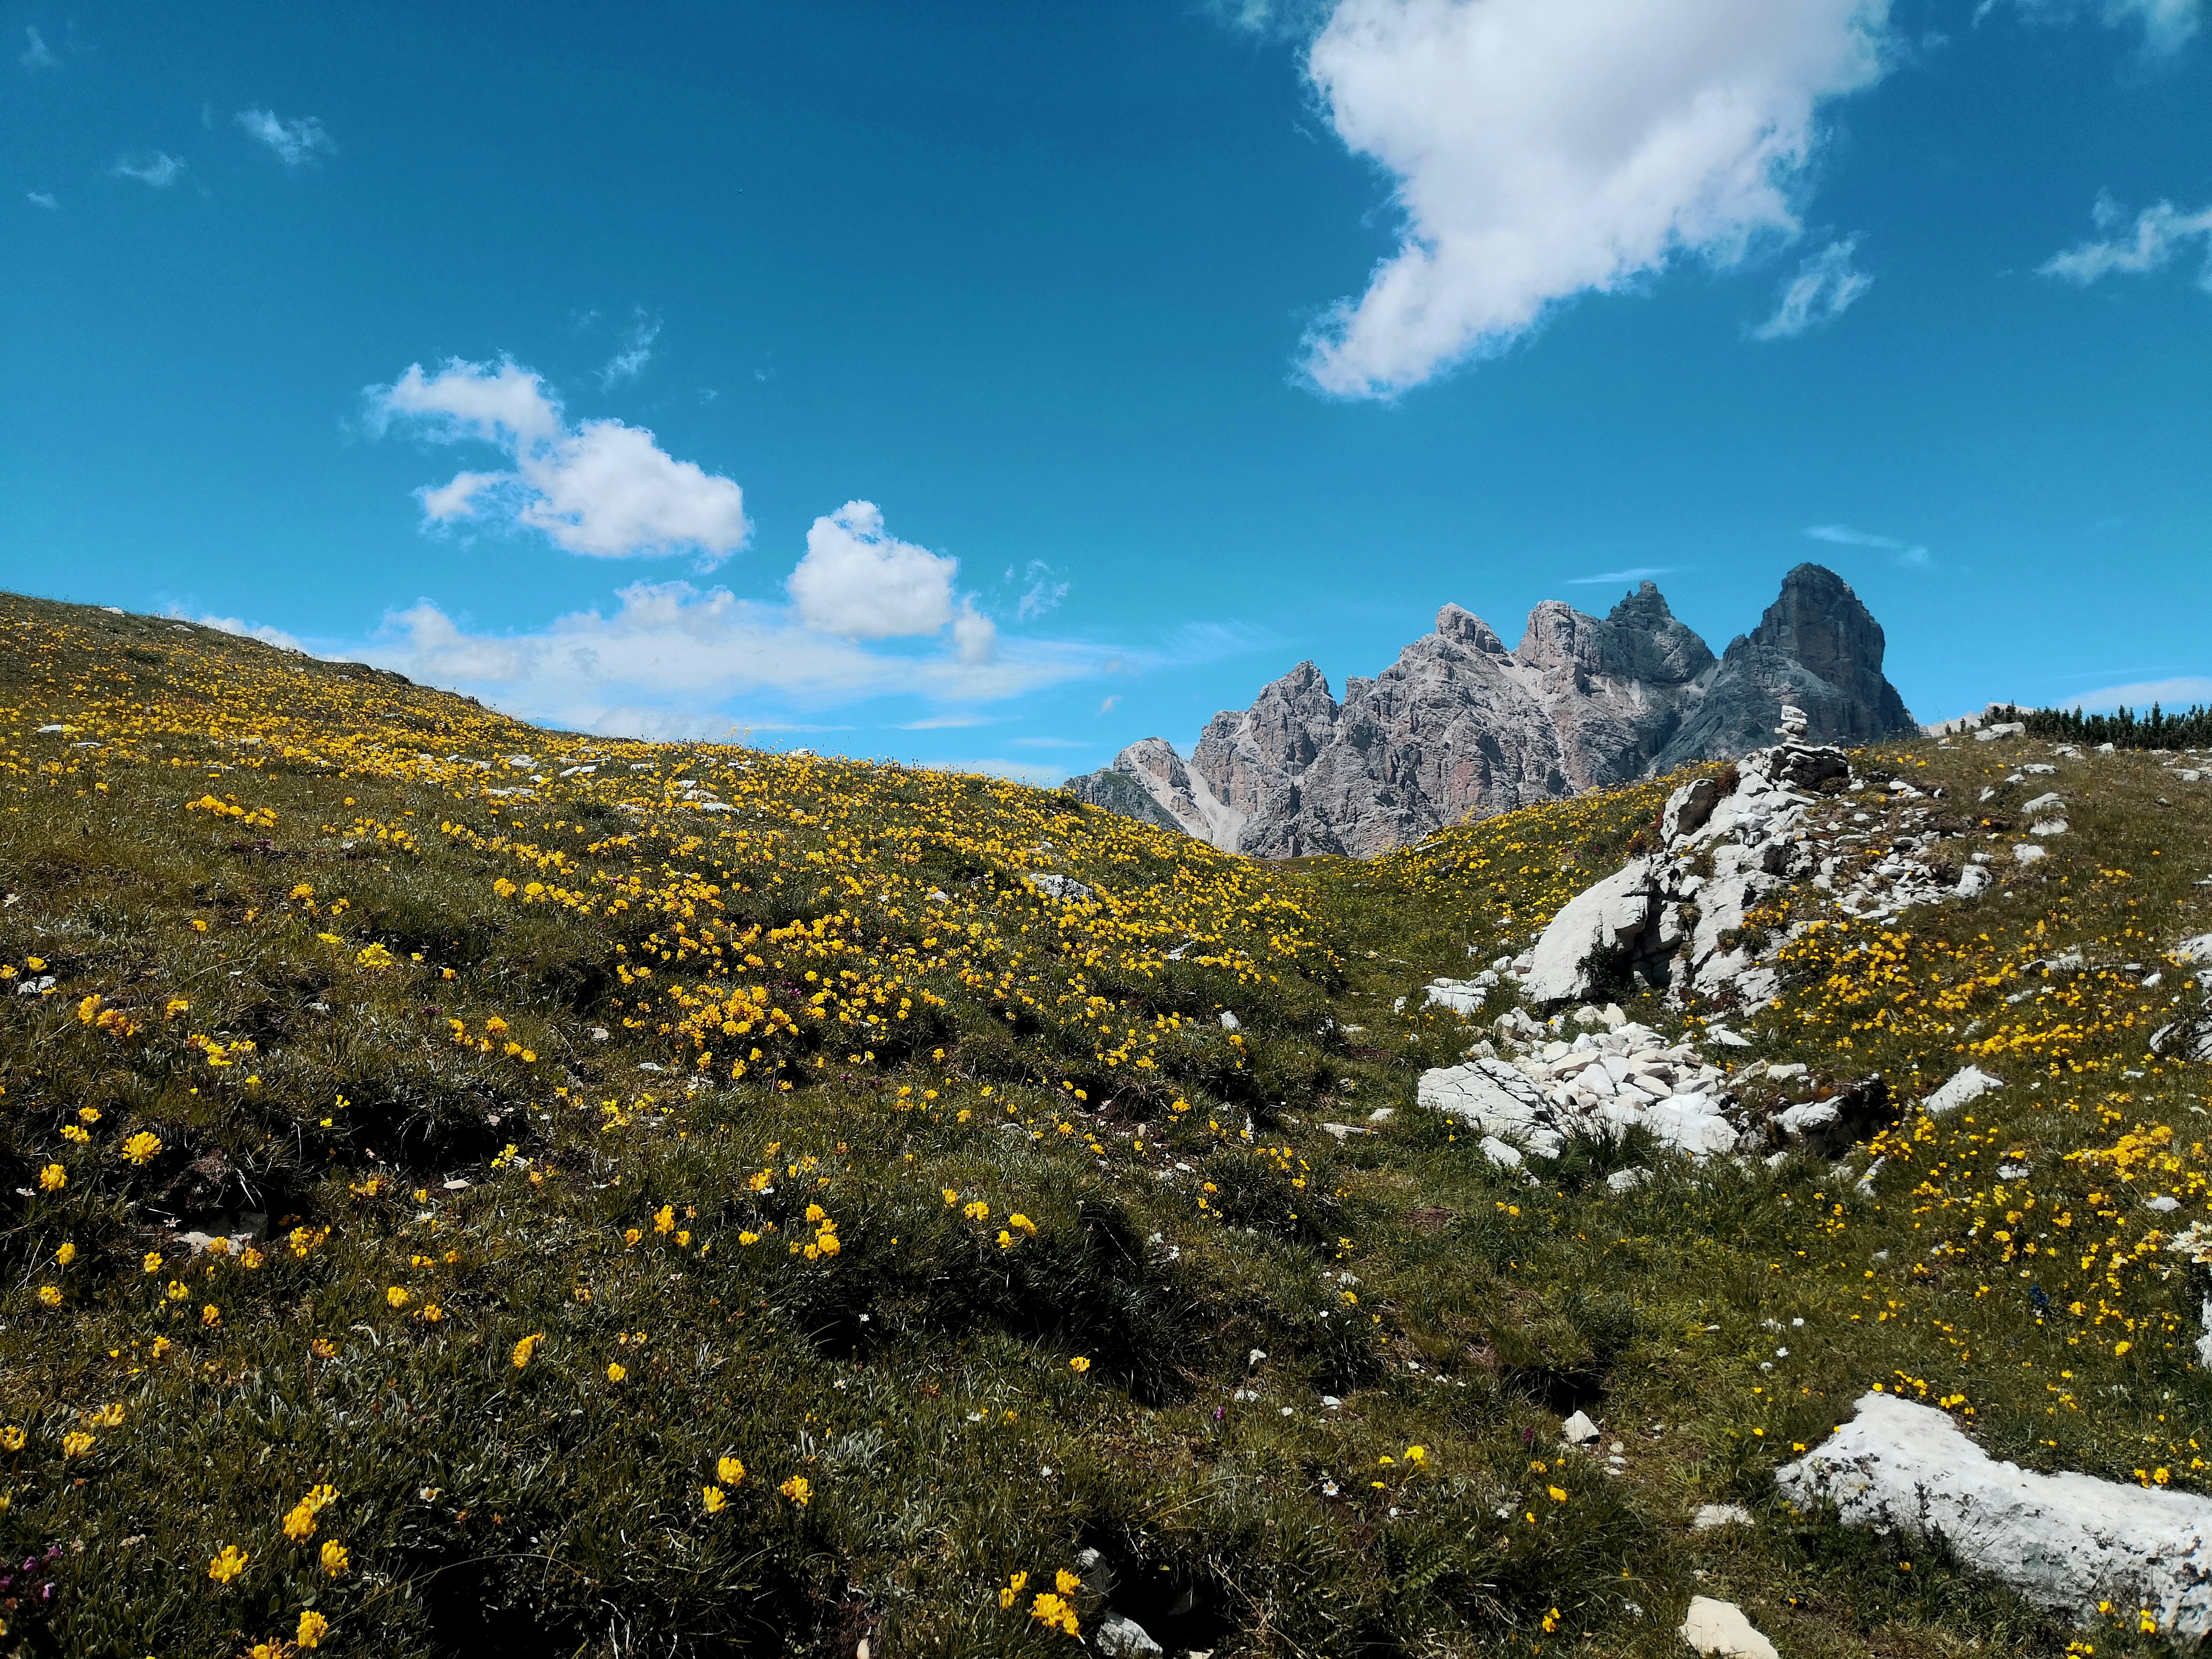 yellow flowers on green grass field near mountain under blue and white sunny cloudy sky during